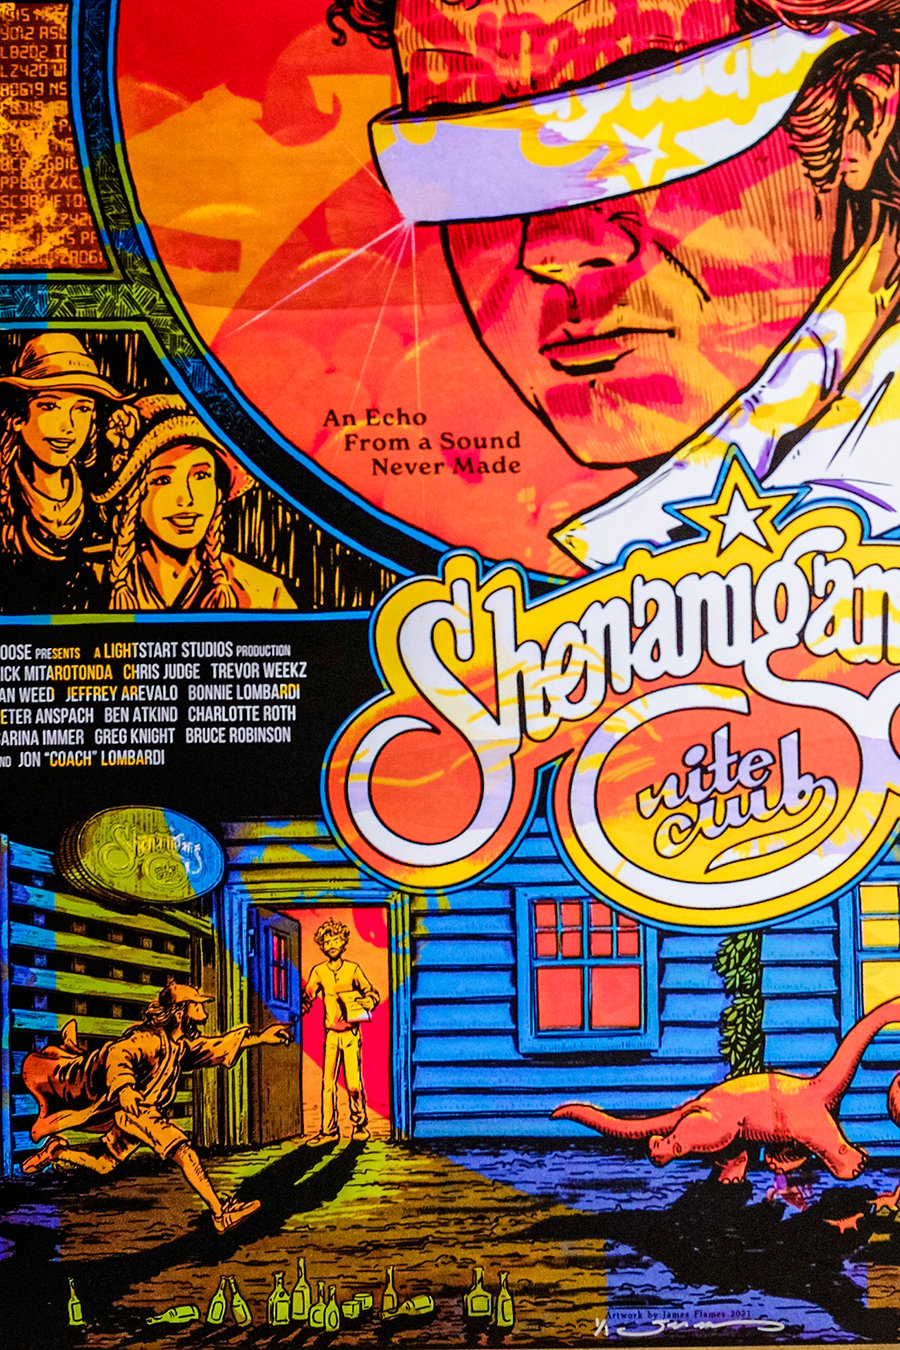 Image of Goose - Shenanigans Nite Club - Official Movie Poster - Test Print